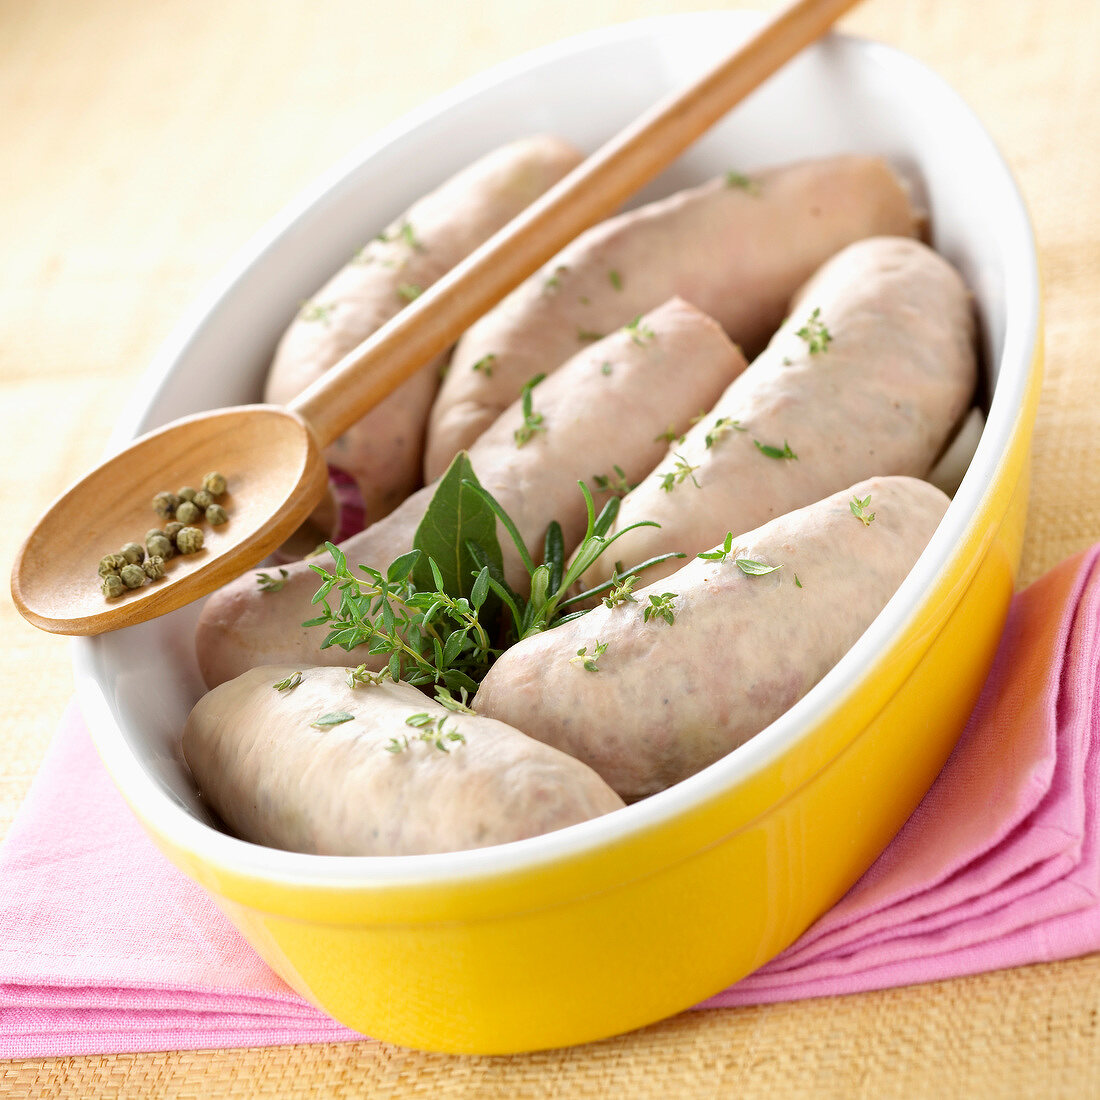 Chitterlings sausages with herbs